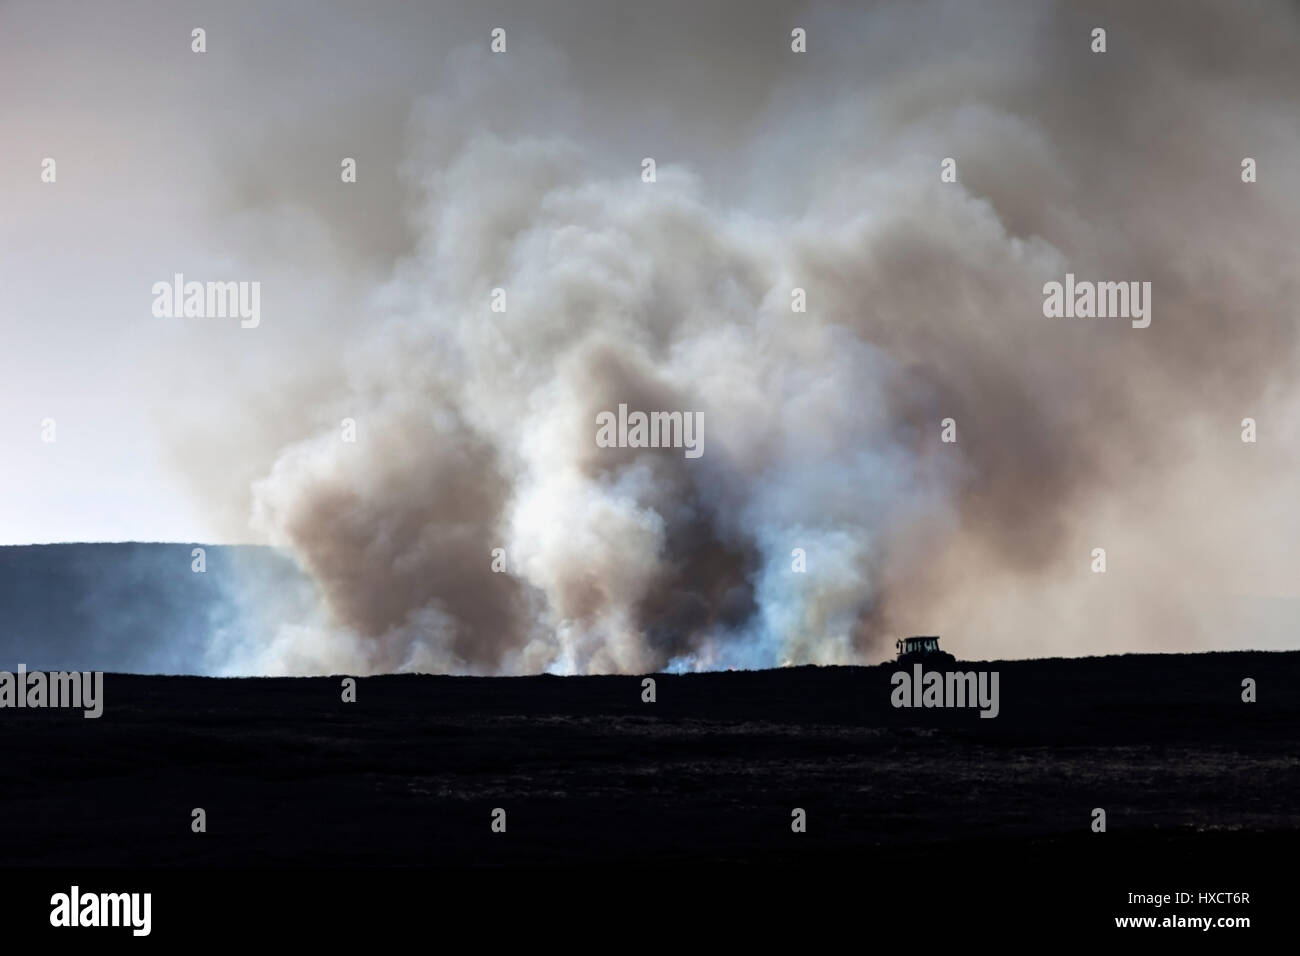 North Pennines, County Durham UK. Sunday 26th March. UK Weather.  A landscape distorted by heat haze and smoke as the annual controlled heather burning of the grouse moors continues during the warm spring weather in the North Pennines © David Forster/Alamy Live News. Stock Photo